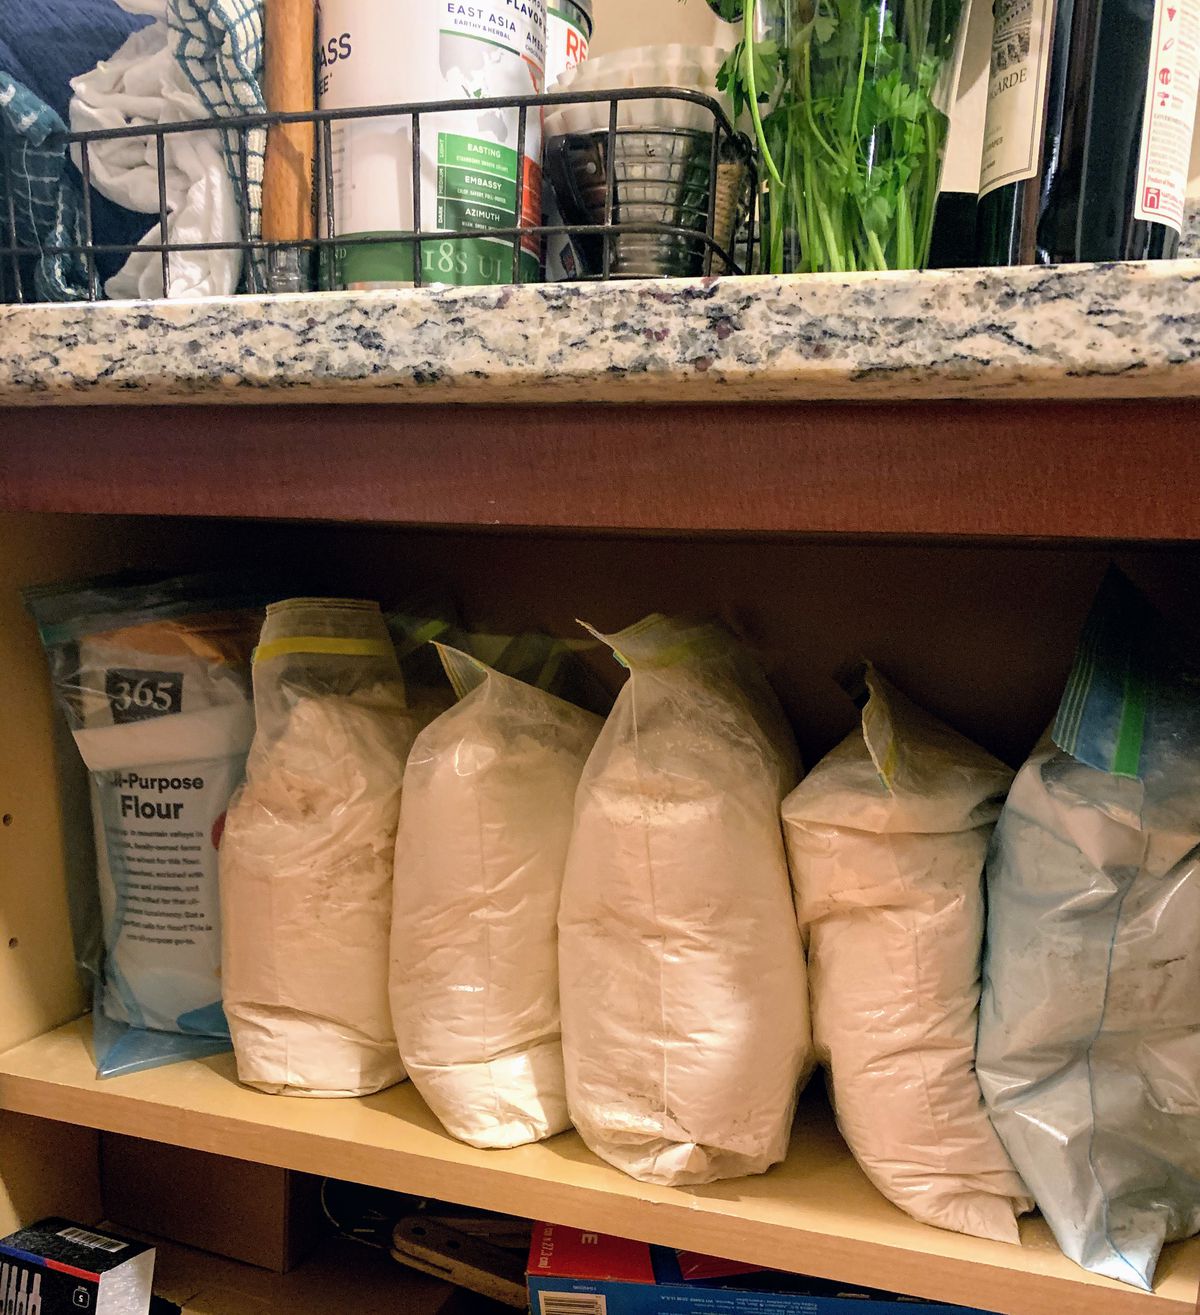 Ziplocked bags of flour lined up in a kitchen cupboard.